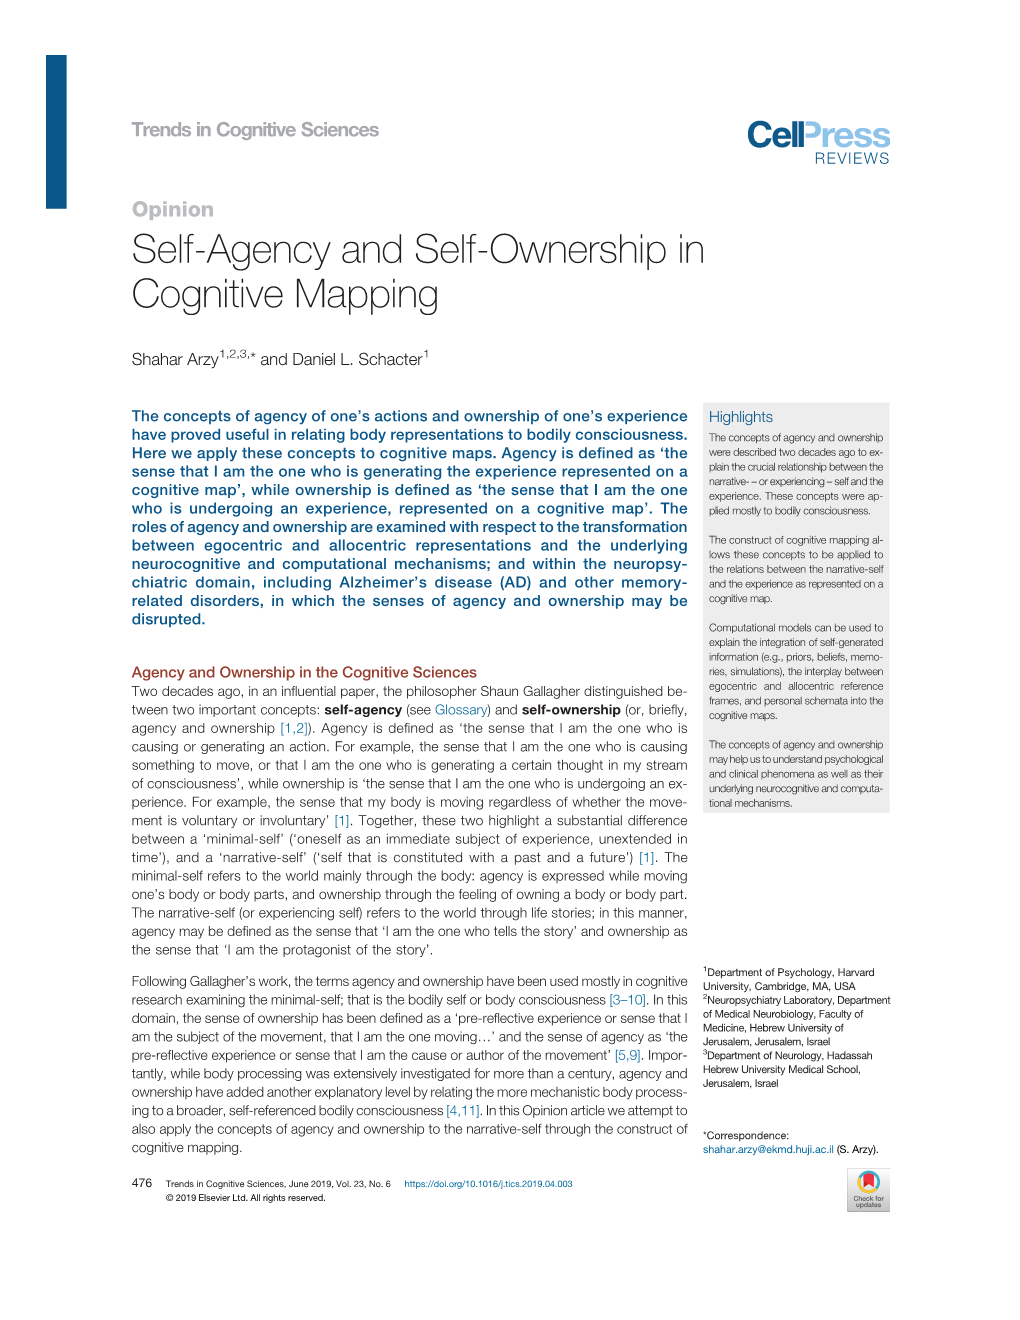 Self-Agency and Self-Ownership in Cognitive Mapping